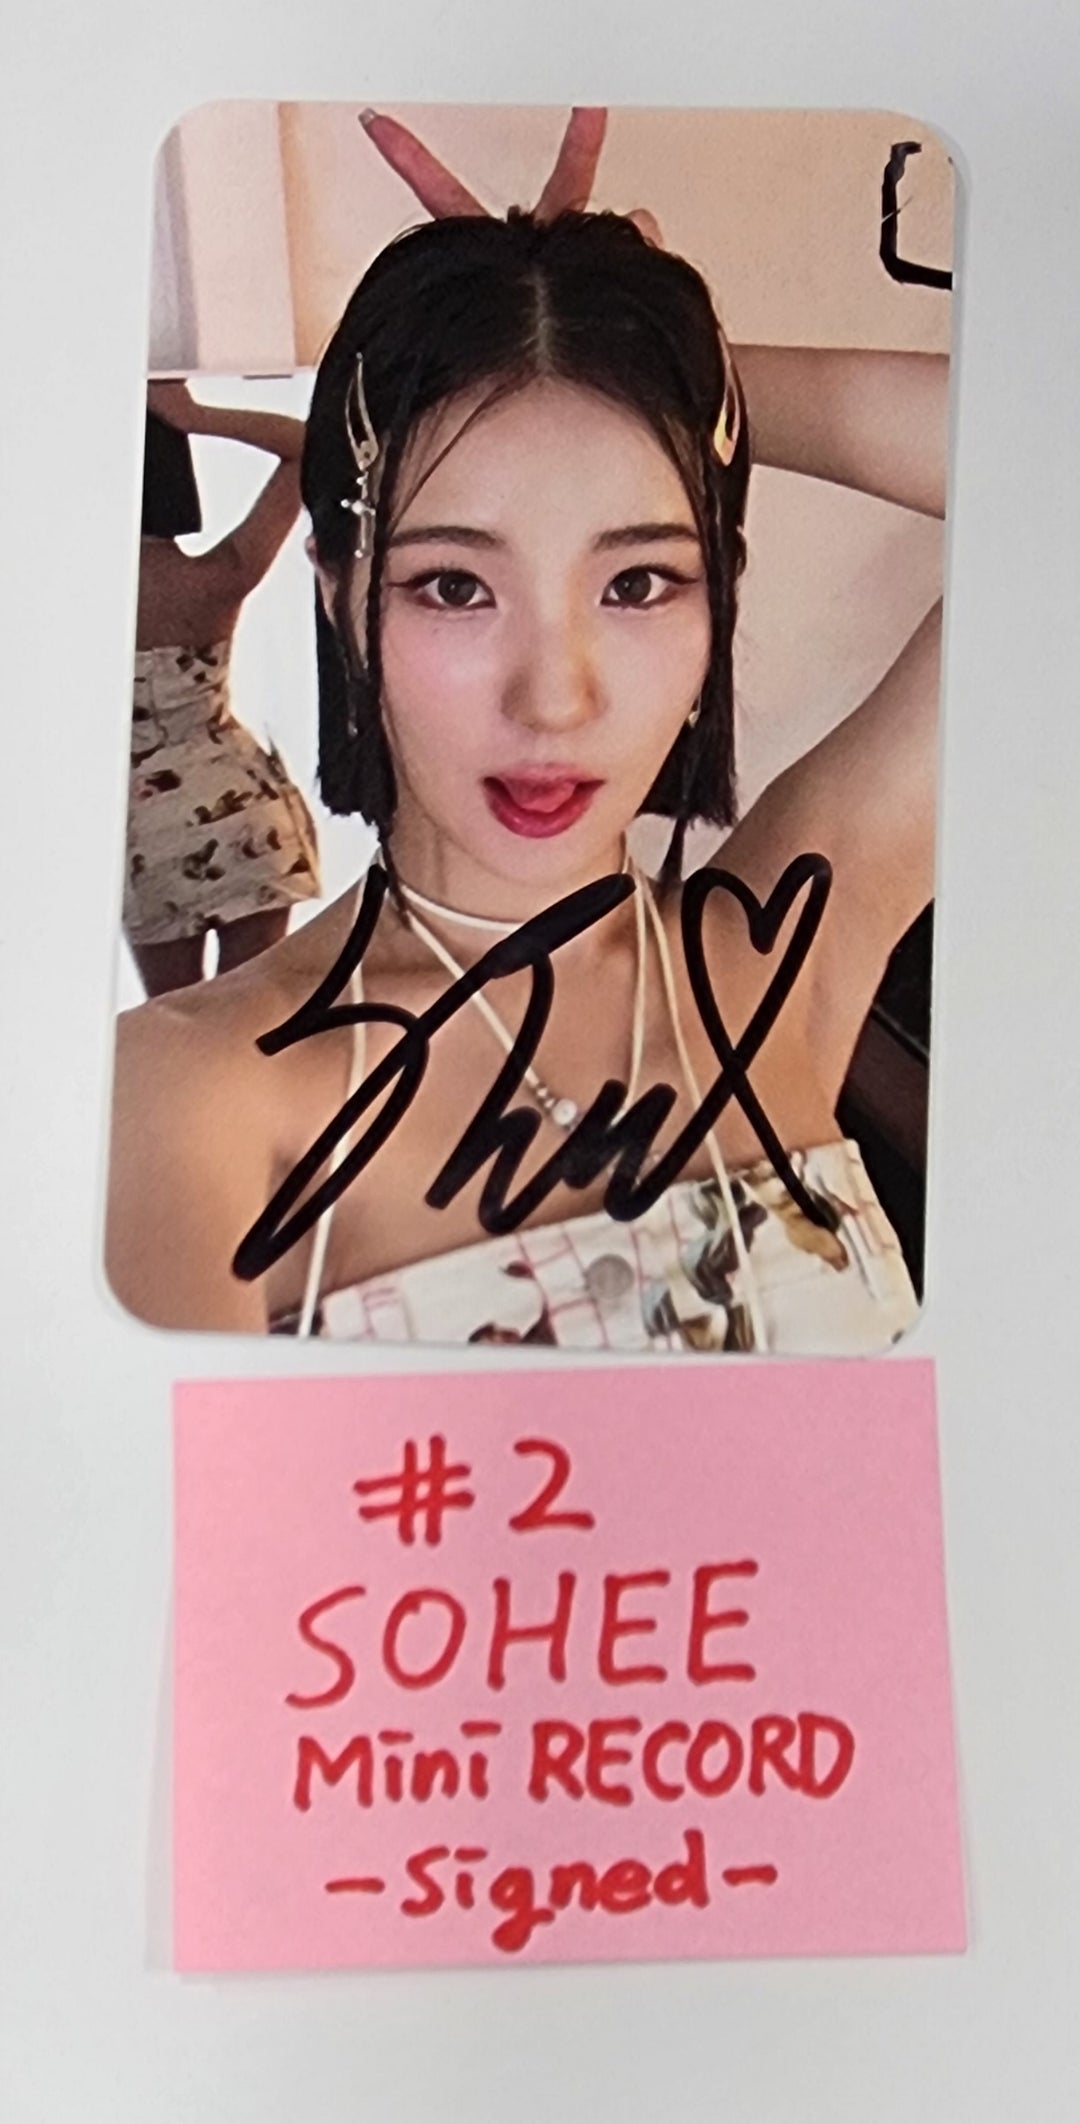 ALICE "Show Down" - Mini Record Fansign Event Photocard, Hand Autographed(Signed) Photocard